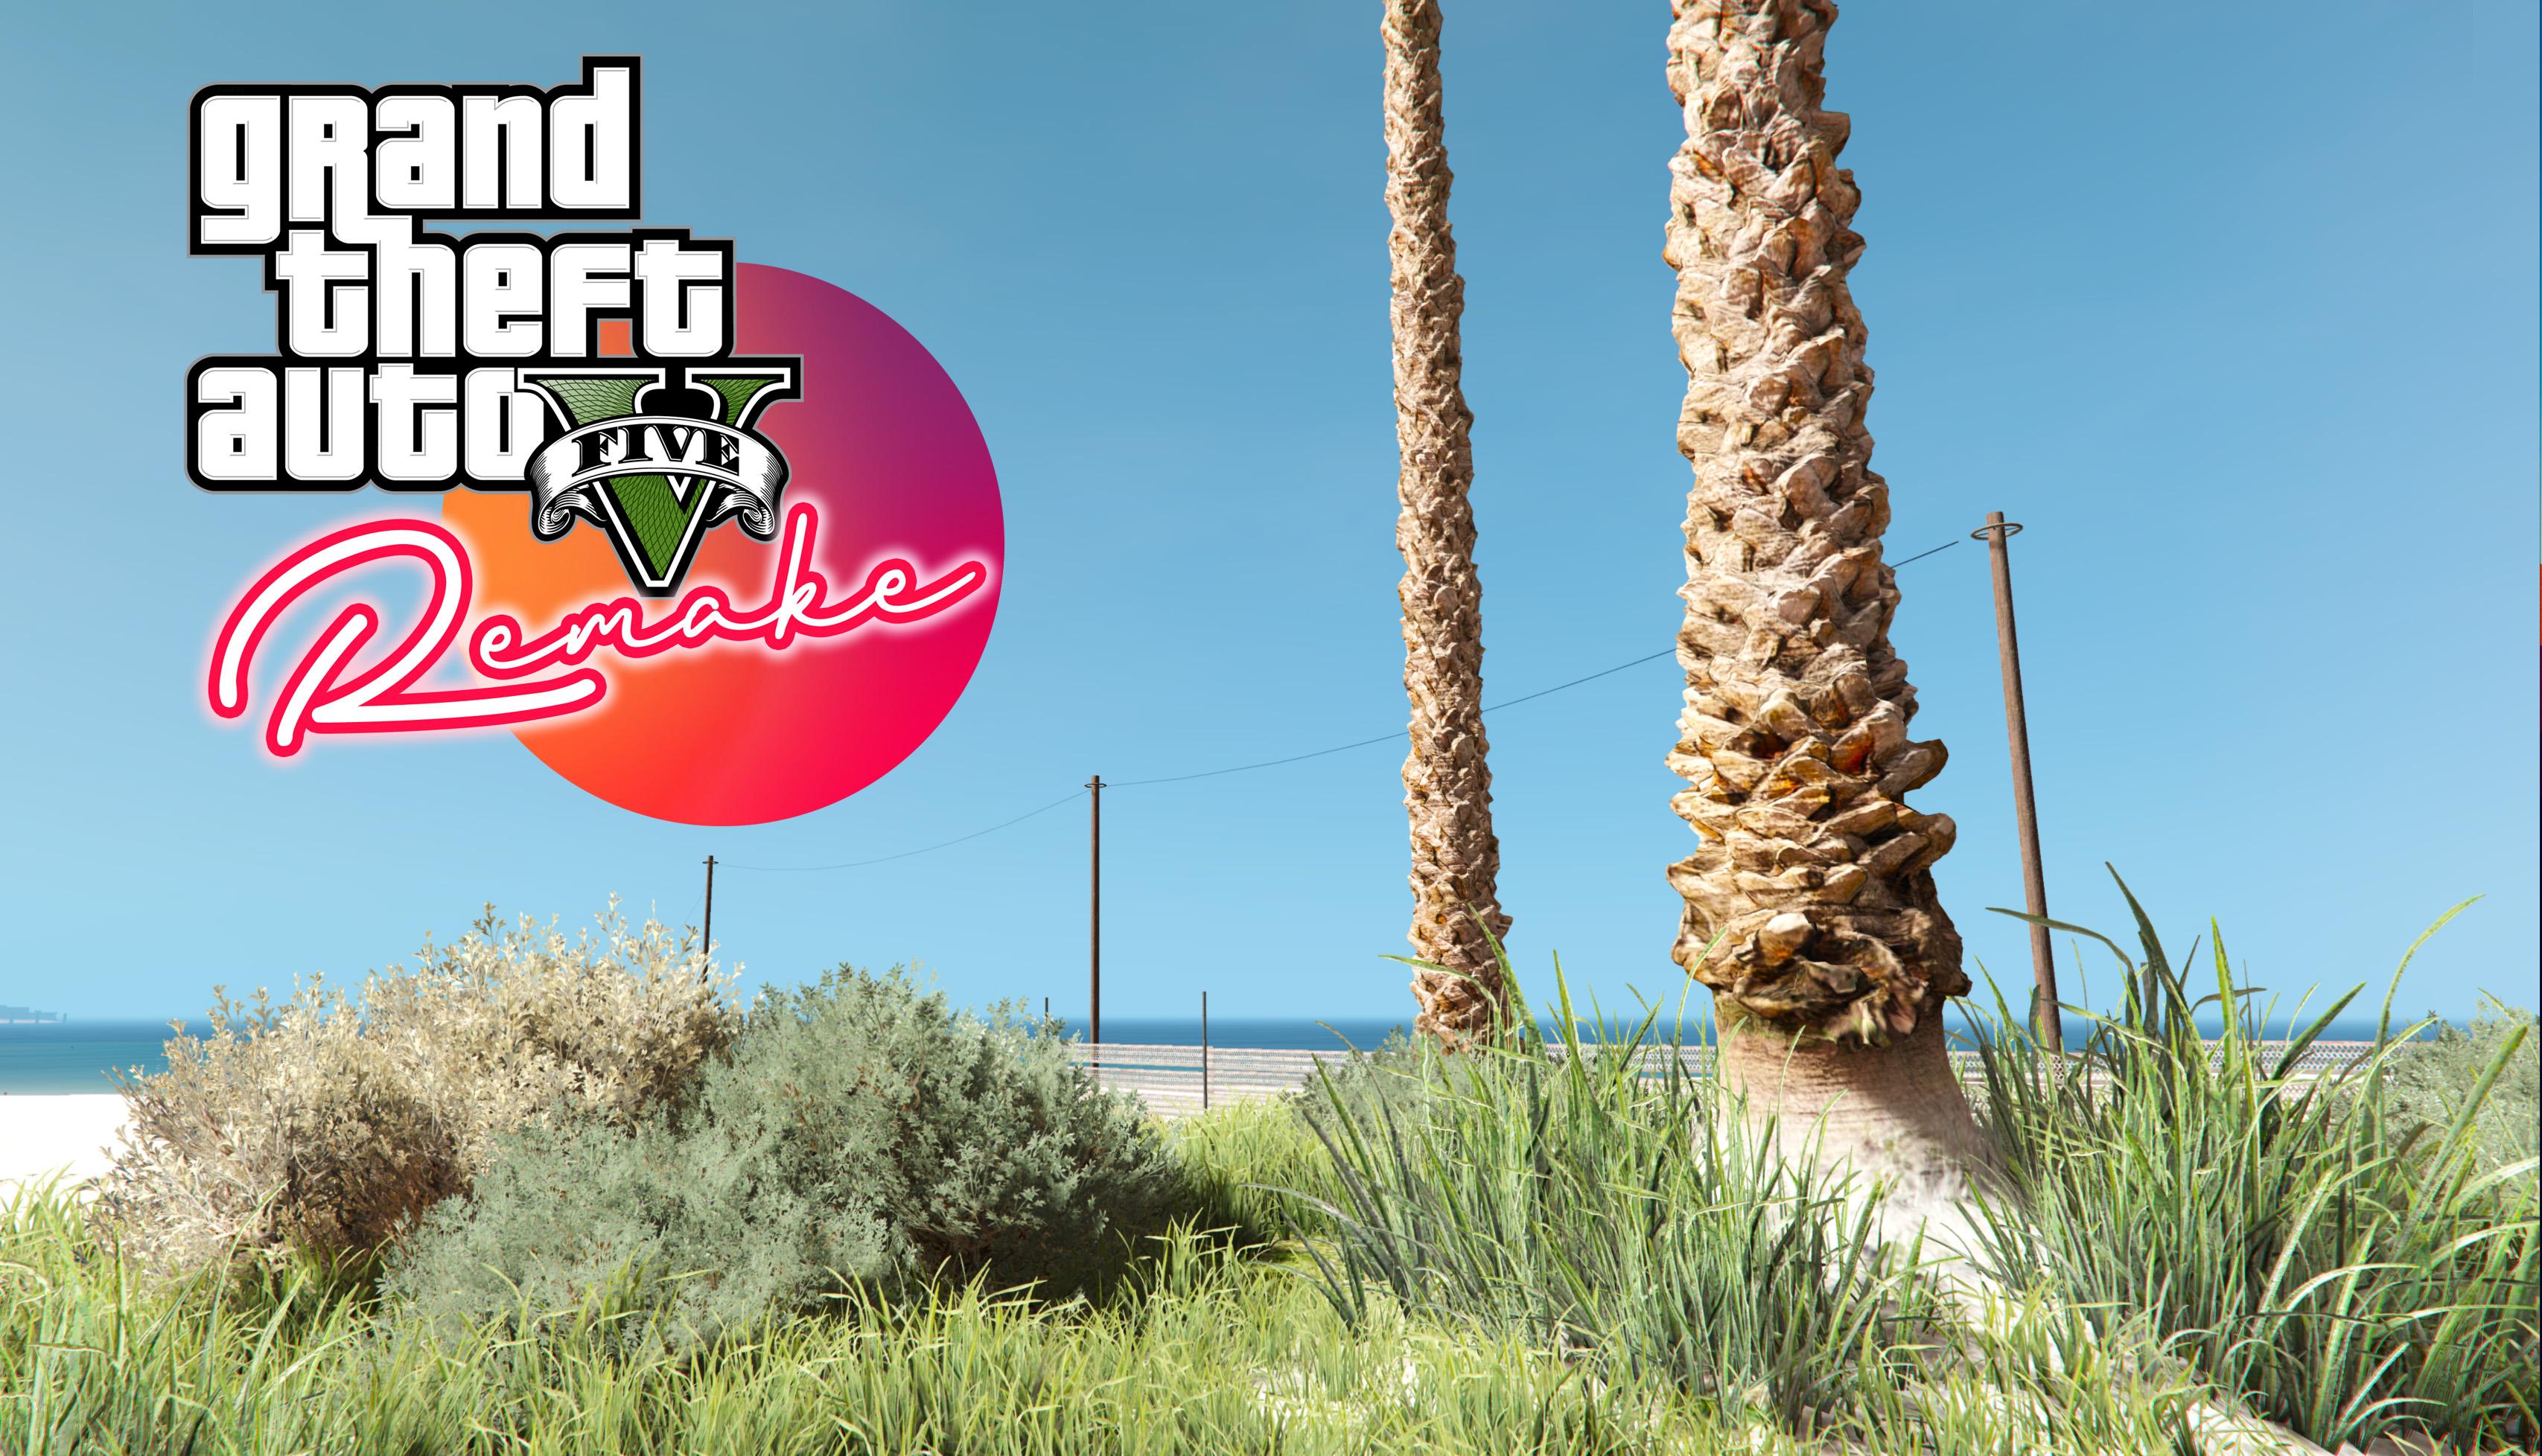 how to install mods for gta 5 pc